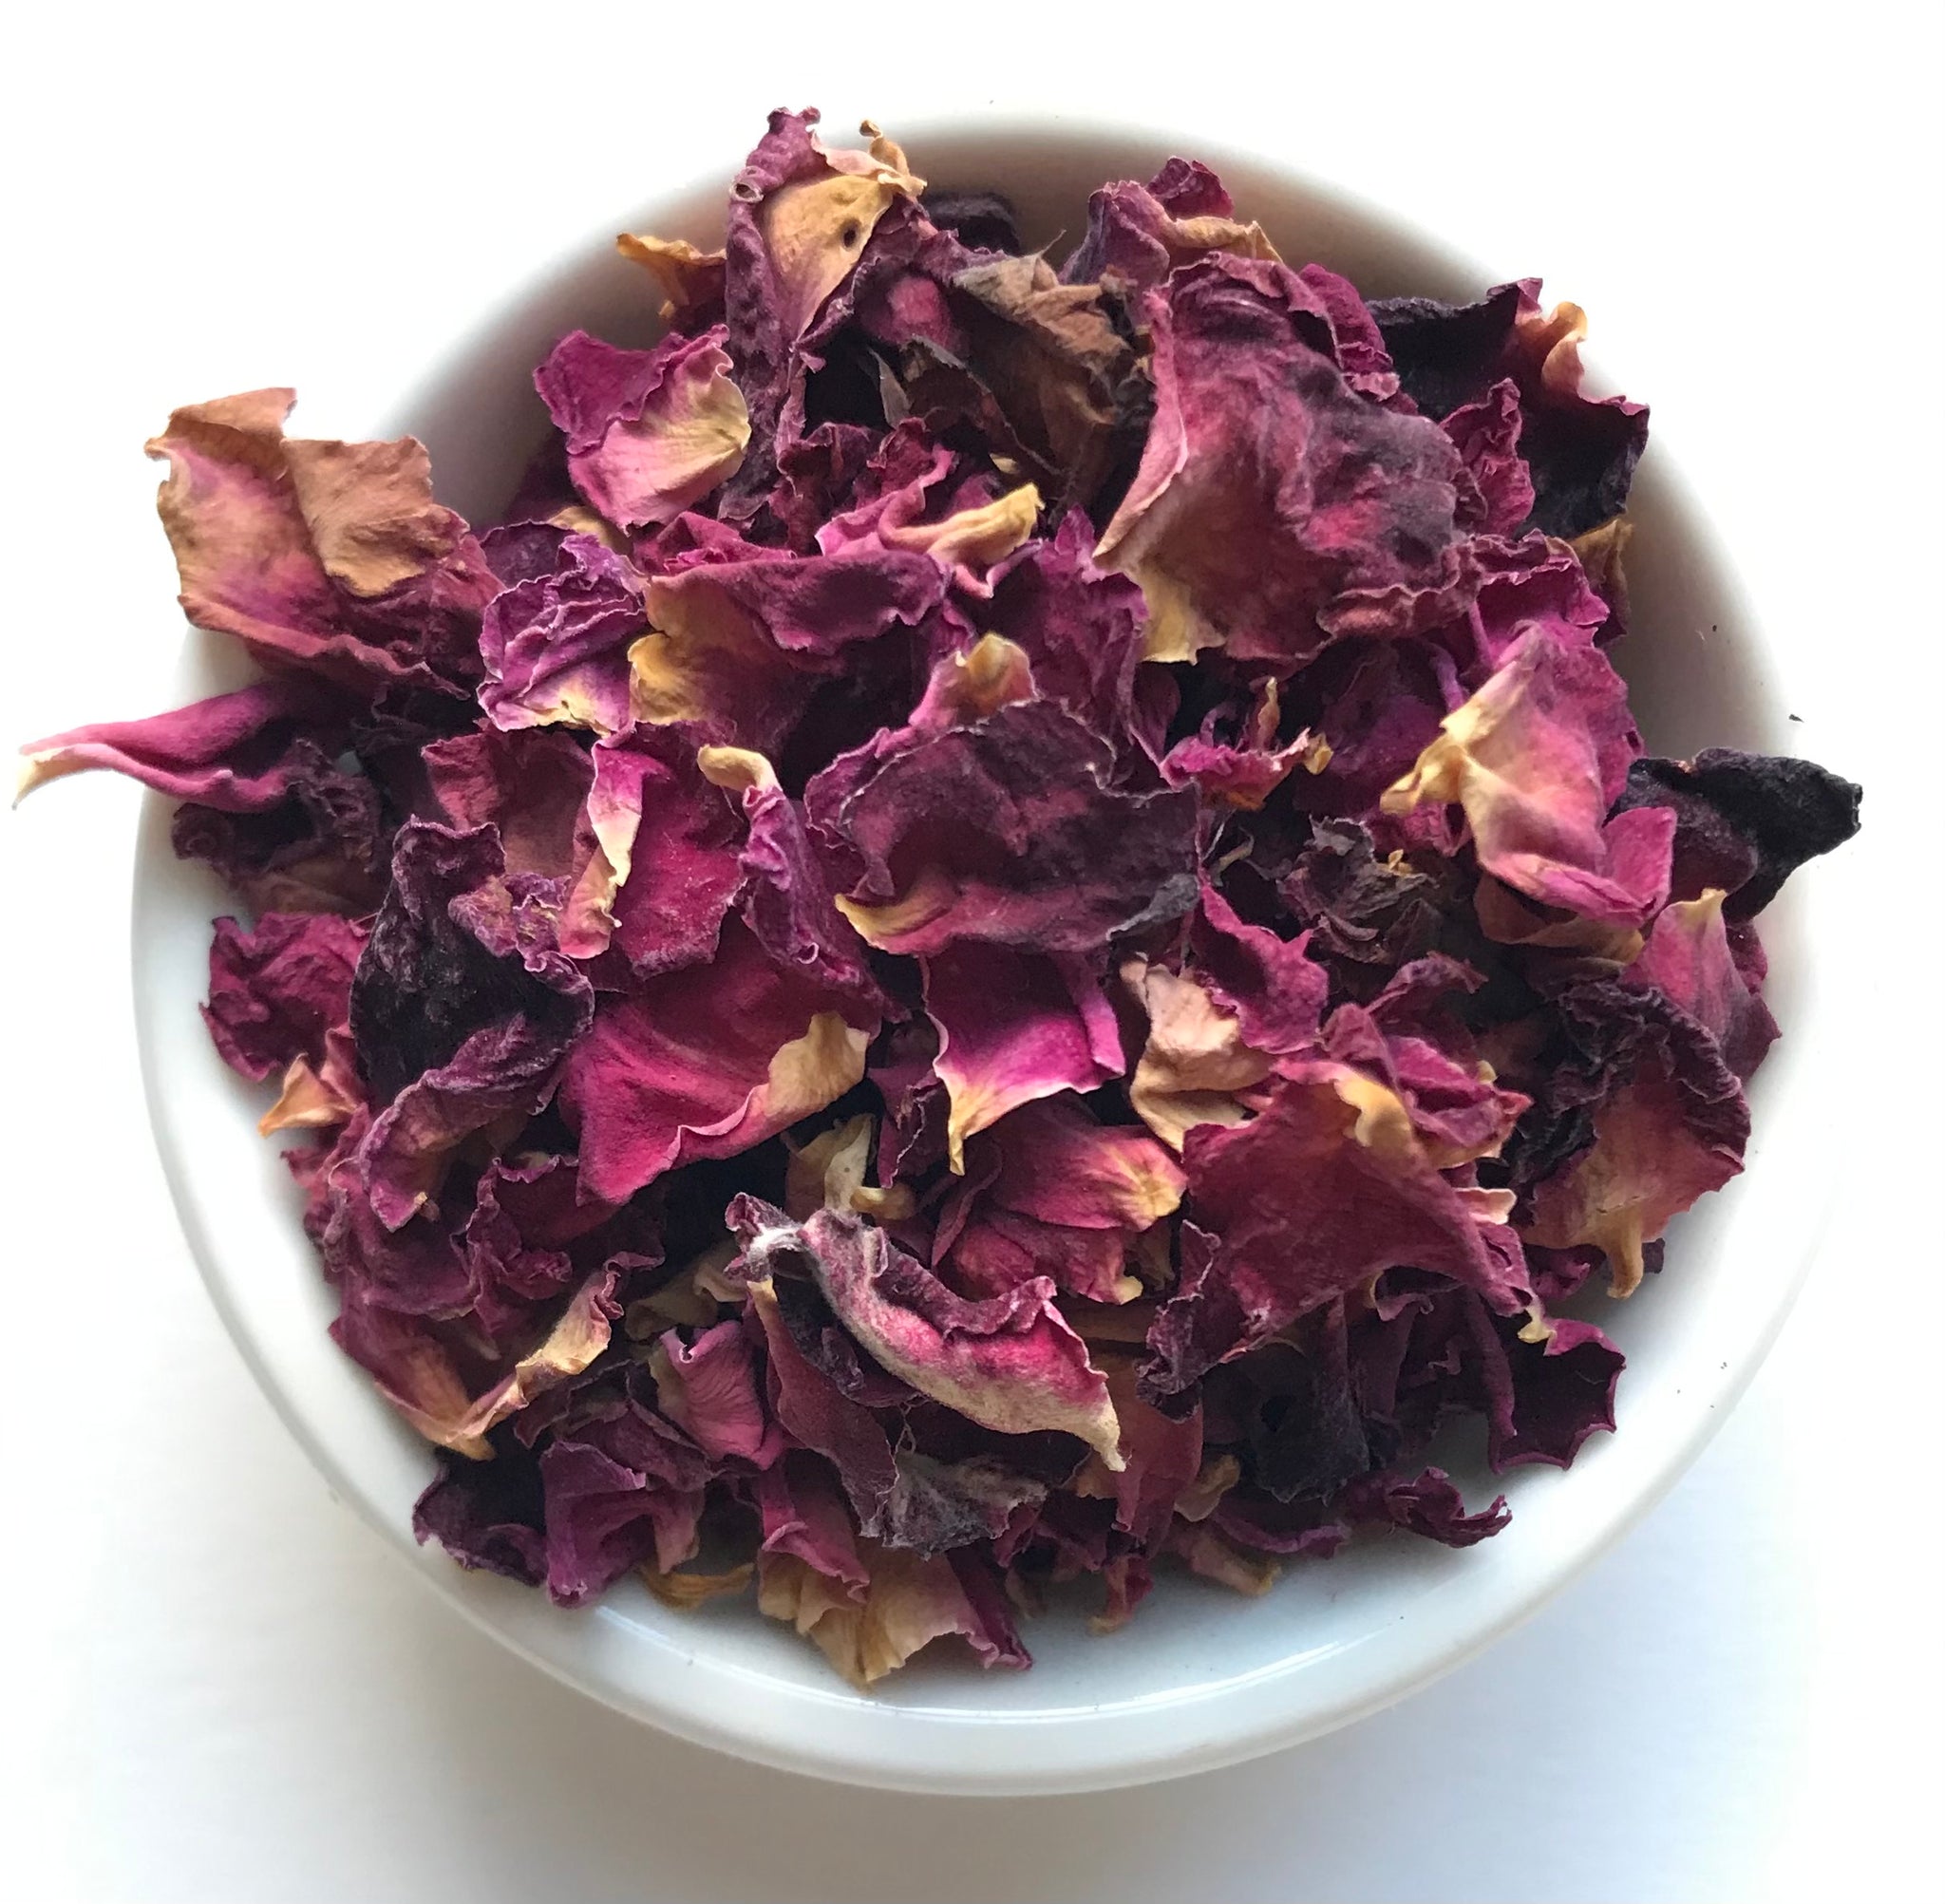 Rose Petals from Red Roses, as used in Shanti Chai & Co's Nettle & Rose Blend, "New Momma" Blend and Rose Petal Chai. 